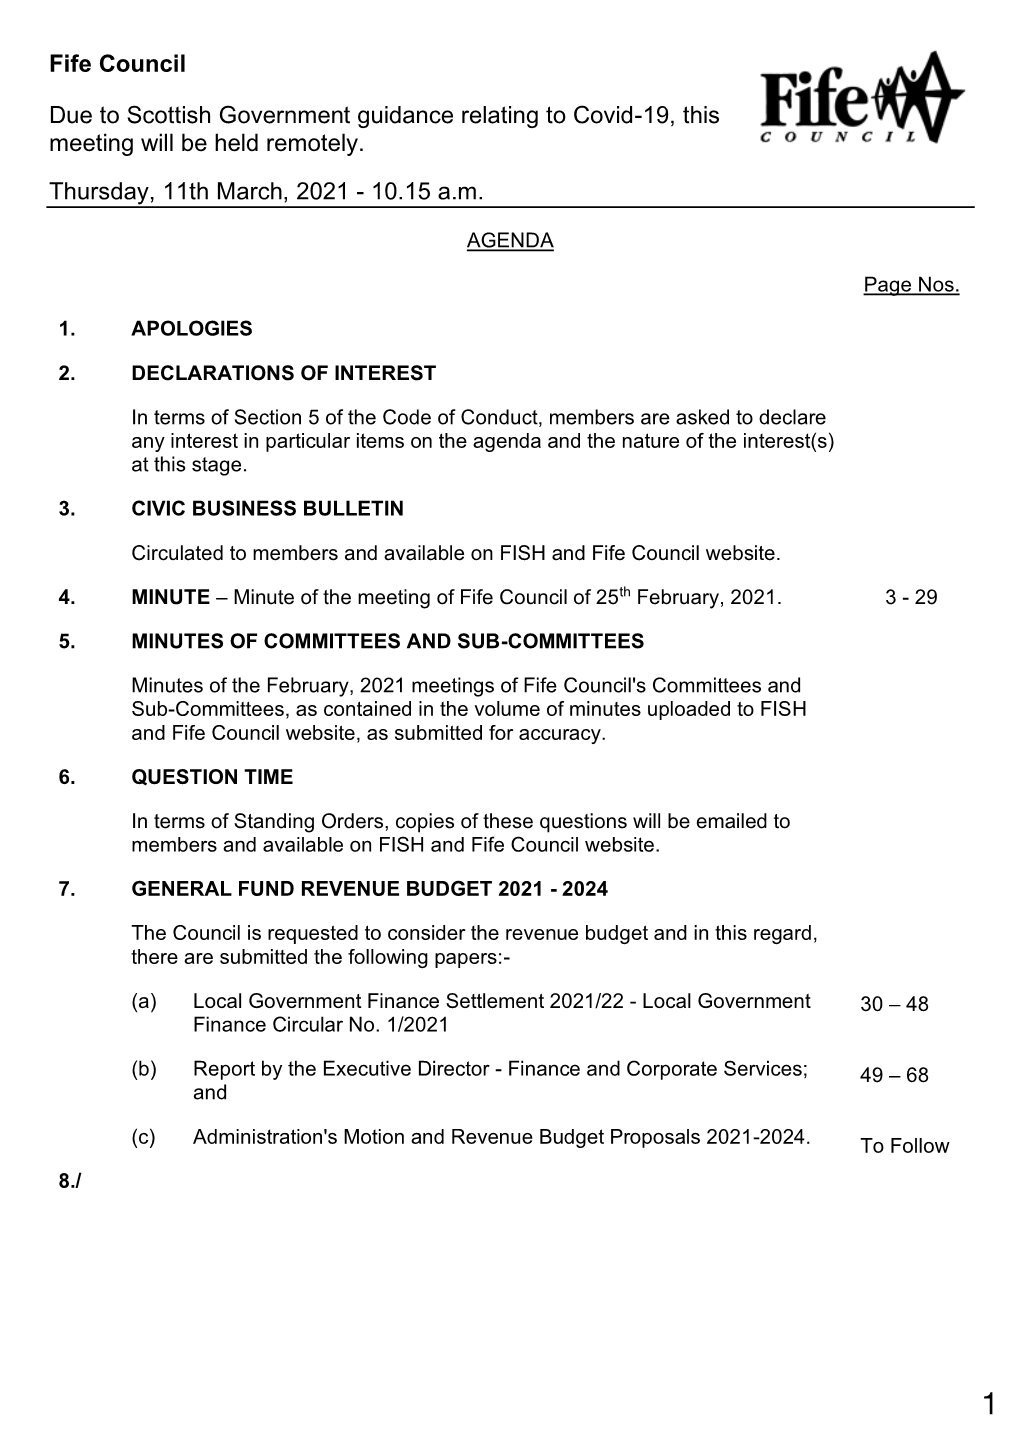 Agenda & Papers for Meeting of Fife Council of 11 March 2021